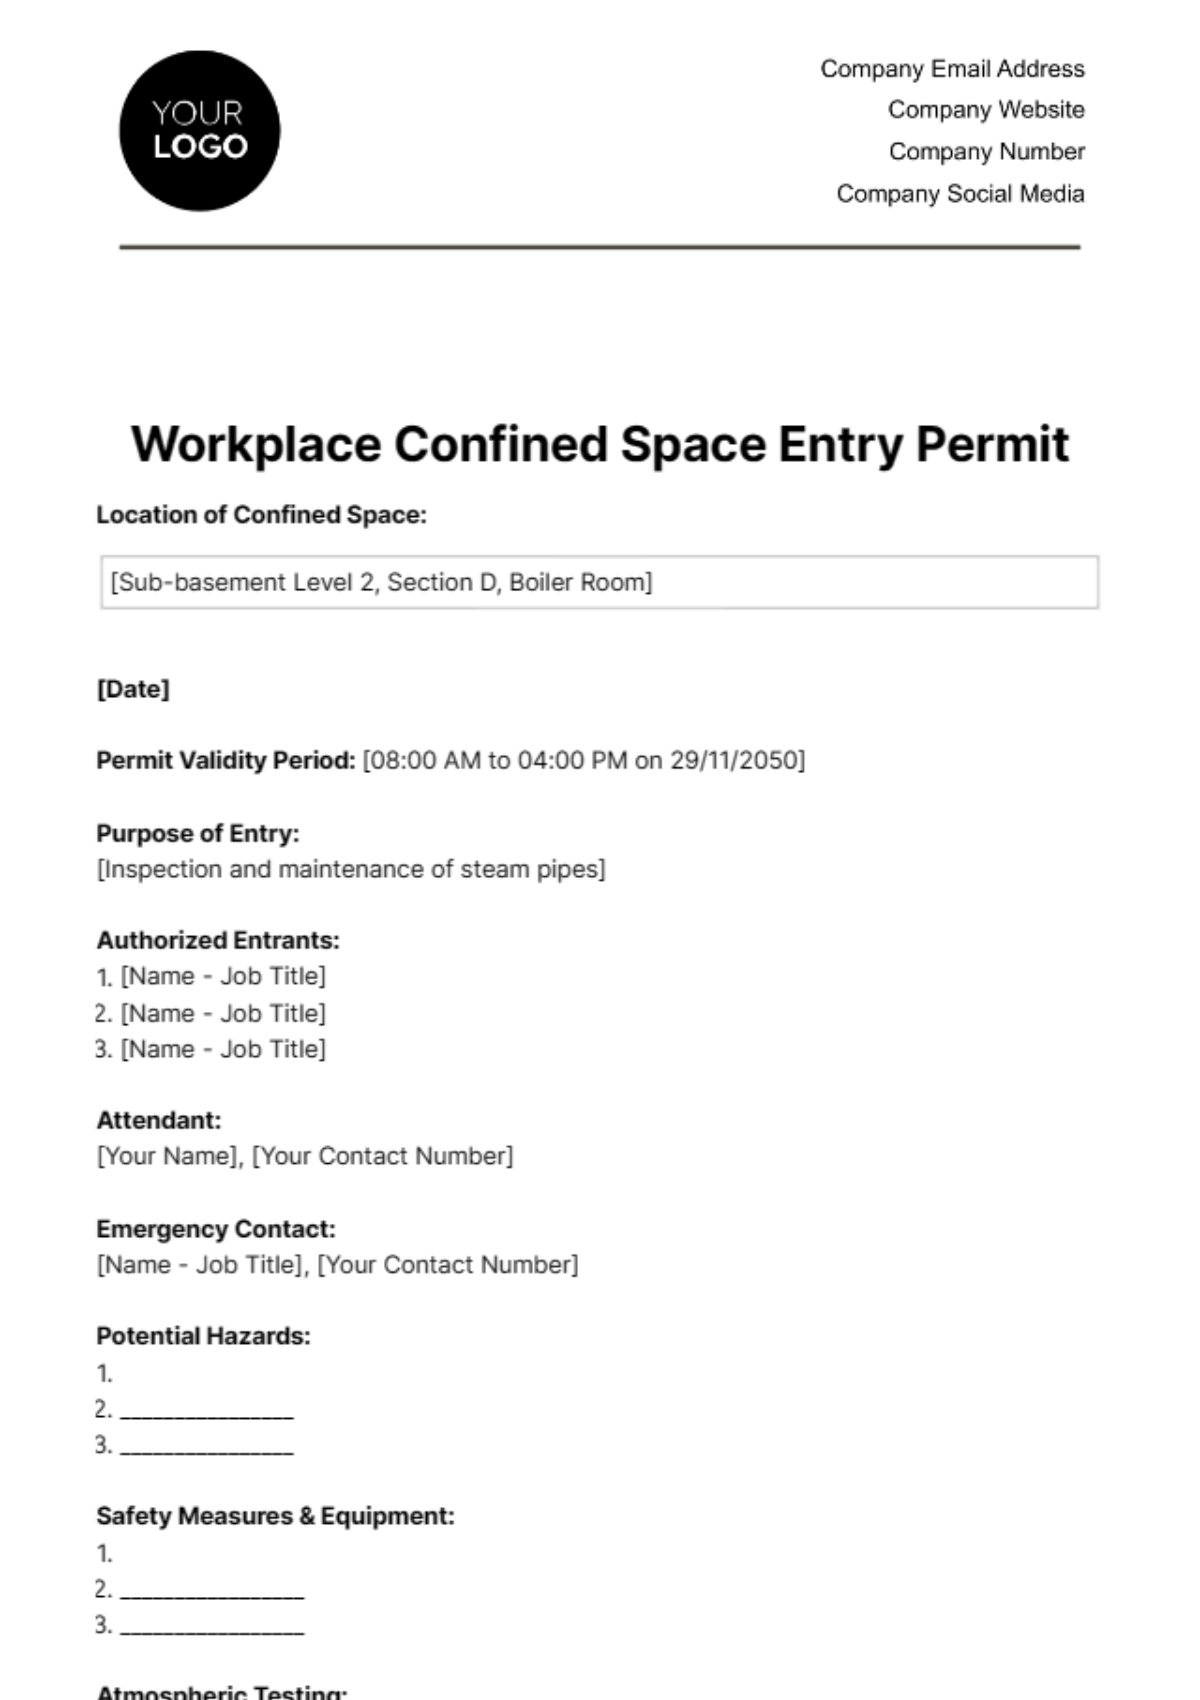 Workplace Confined Space Entry Permit Template